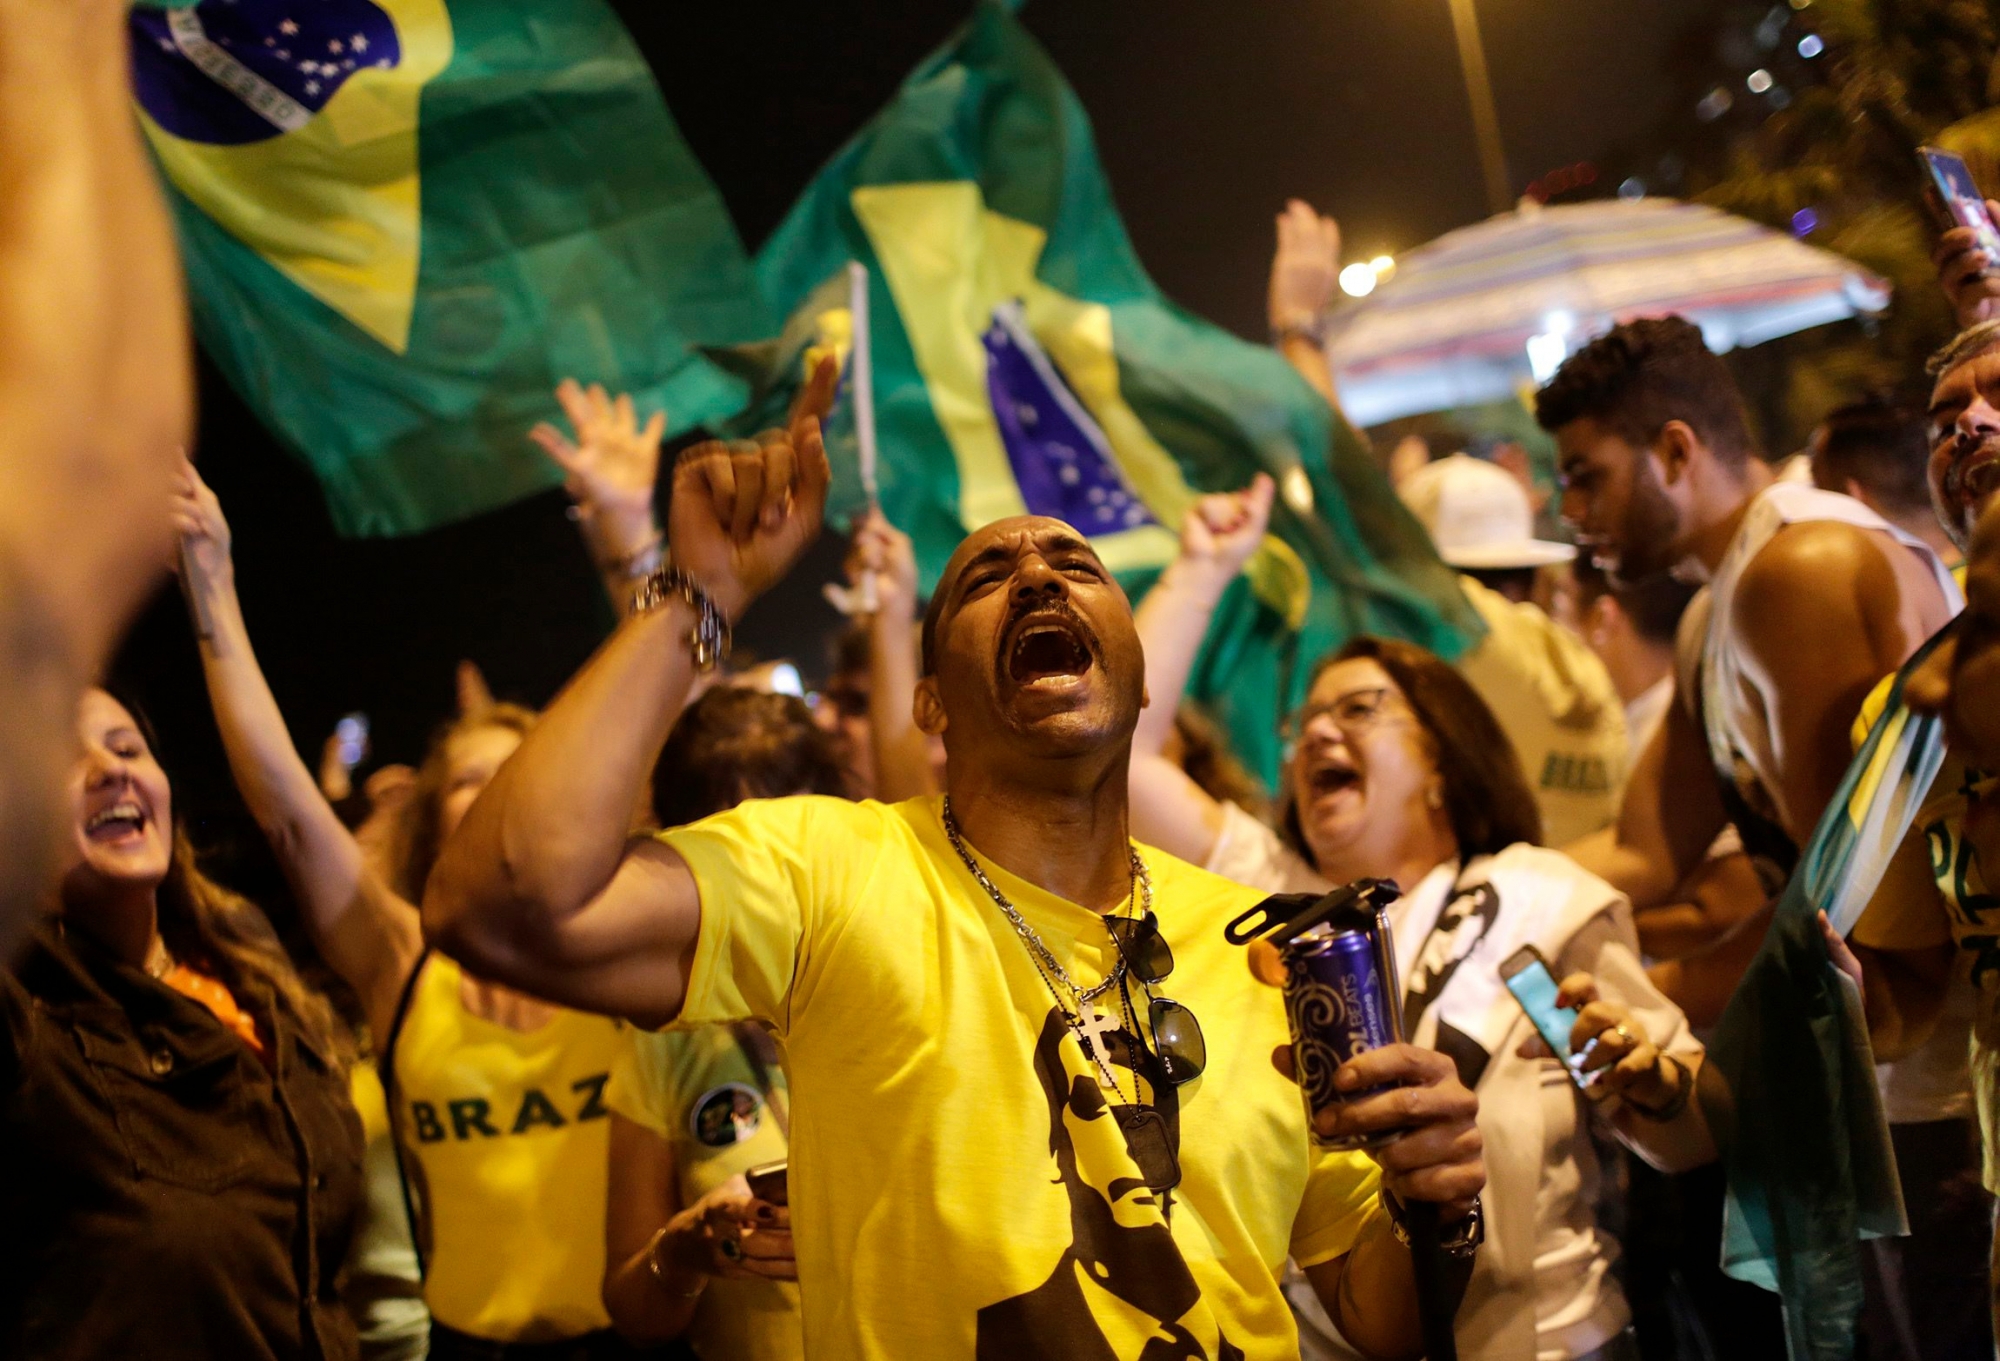 Supporters of presidential candidate Jair Bolsonaro celebrate in front of his residence after he was declared the winner of the election run off, in Rio de Janeiro, Brazil, Sunday, Oct. 28, 2018. BrazilÄôs Supreme Electoral Tribunal declared the far-right congressman the next president of Latin AmericaÄôs biggest country, with 96 percent of ballots counted. (AP Photo/Silvia Izquierdo) Brazil Elections